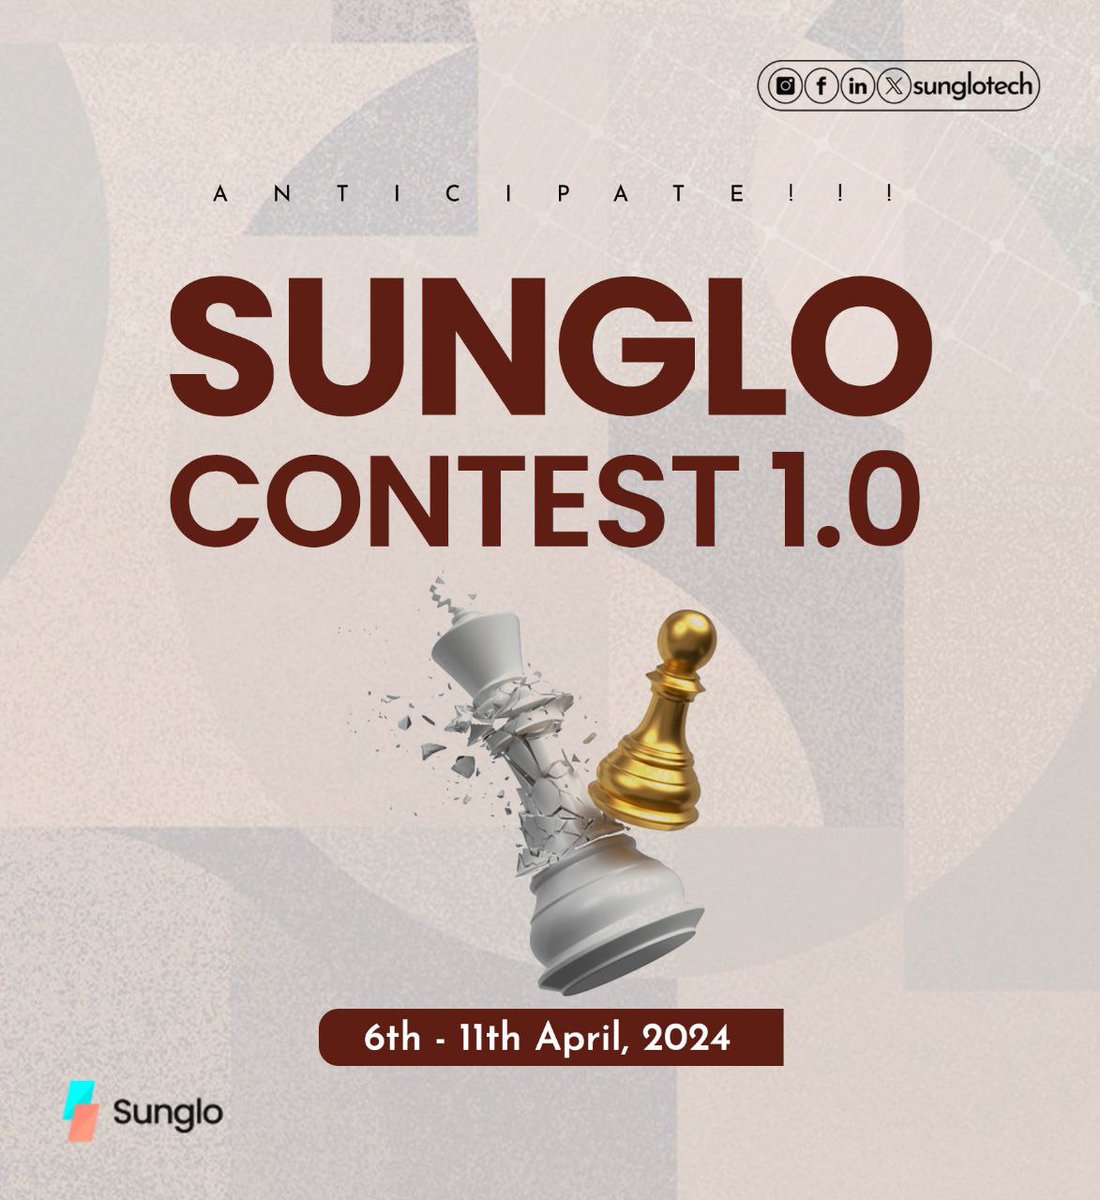 Introducing SUNGLO CONTEST 1.0💥💥

Get ready to show us how well you know  Sunglo Technology and win big😅

Stay tuned for more details on this contest and how to win.

To participate in this contest, visit sunglo.io to join our wait-list and join our Community.